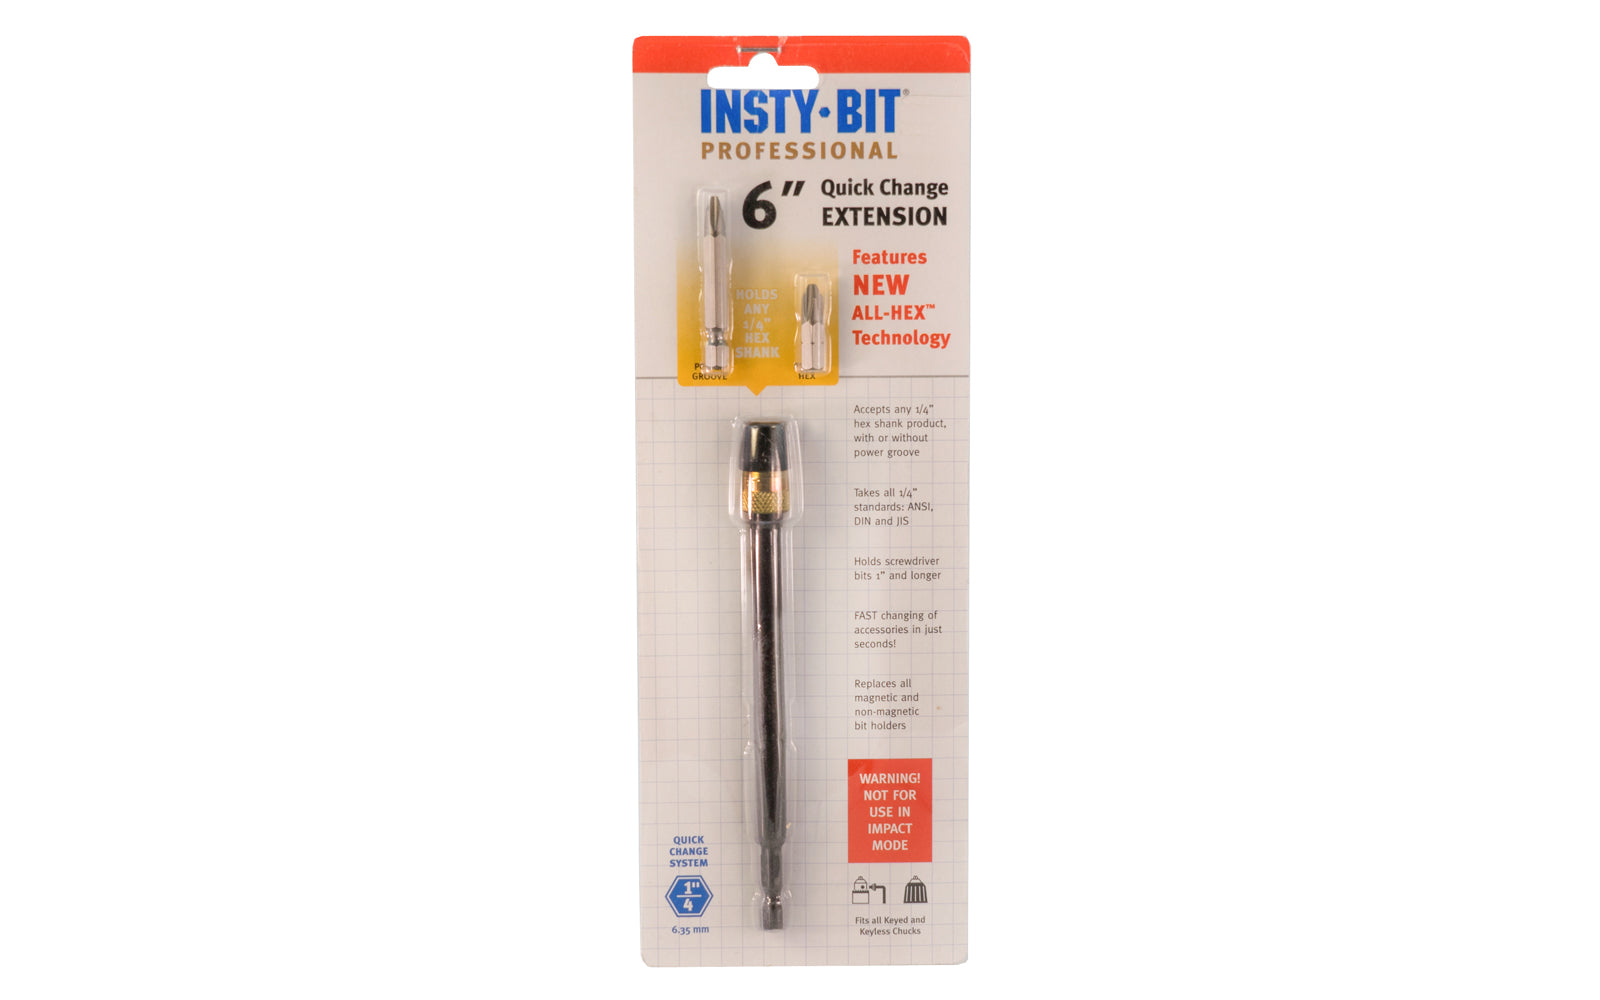 Insty-Bit 6" Quick Change Extension Bit. Accepts any 1/4" hex shank product, with or without power groove. Takes all 1/4" standards: ANSI, DIN, JIS. 6" length. Insty-Bit Model 87506.